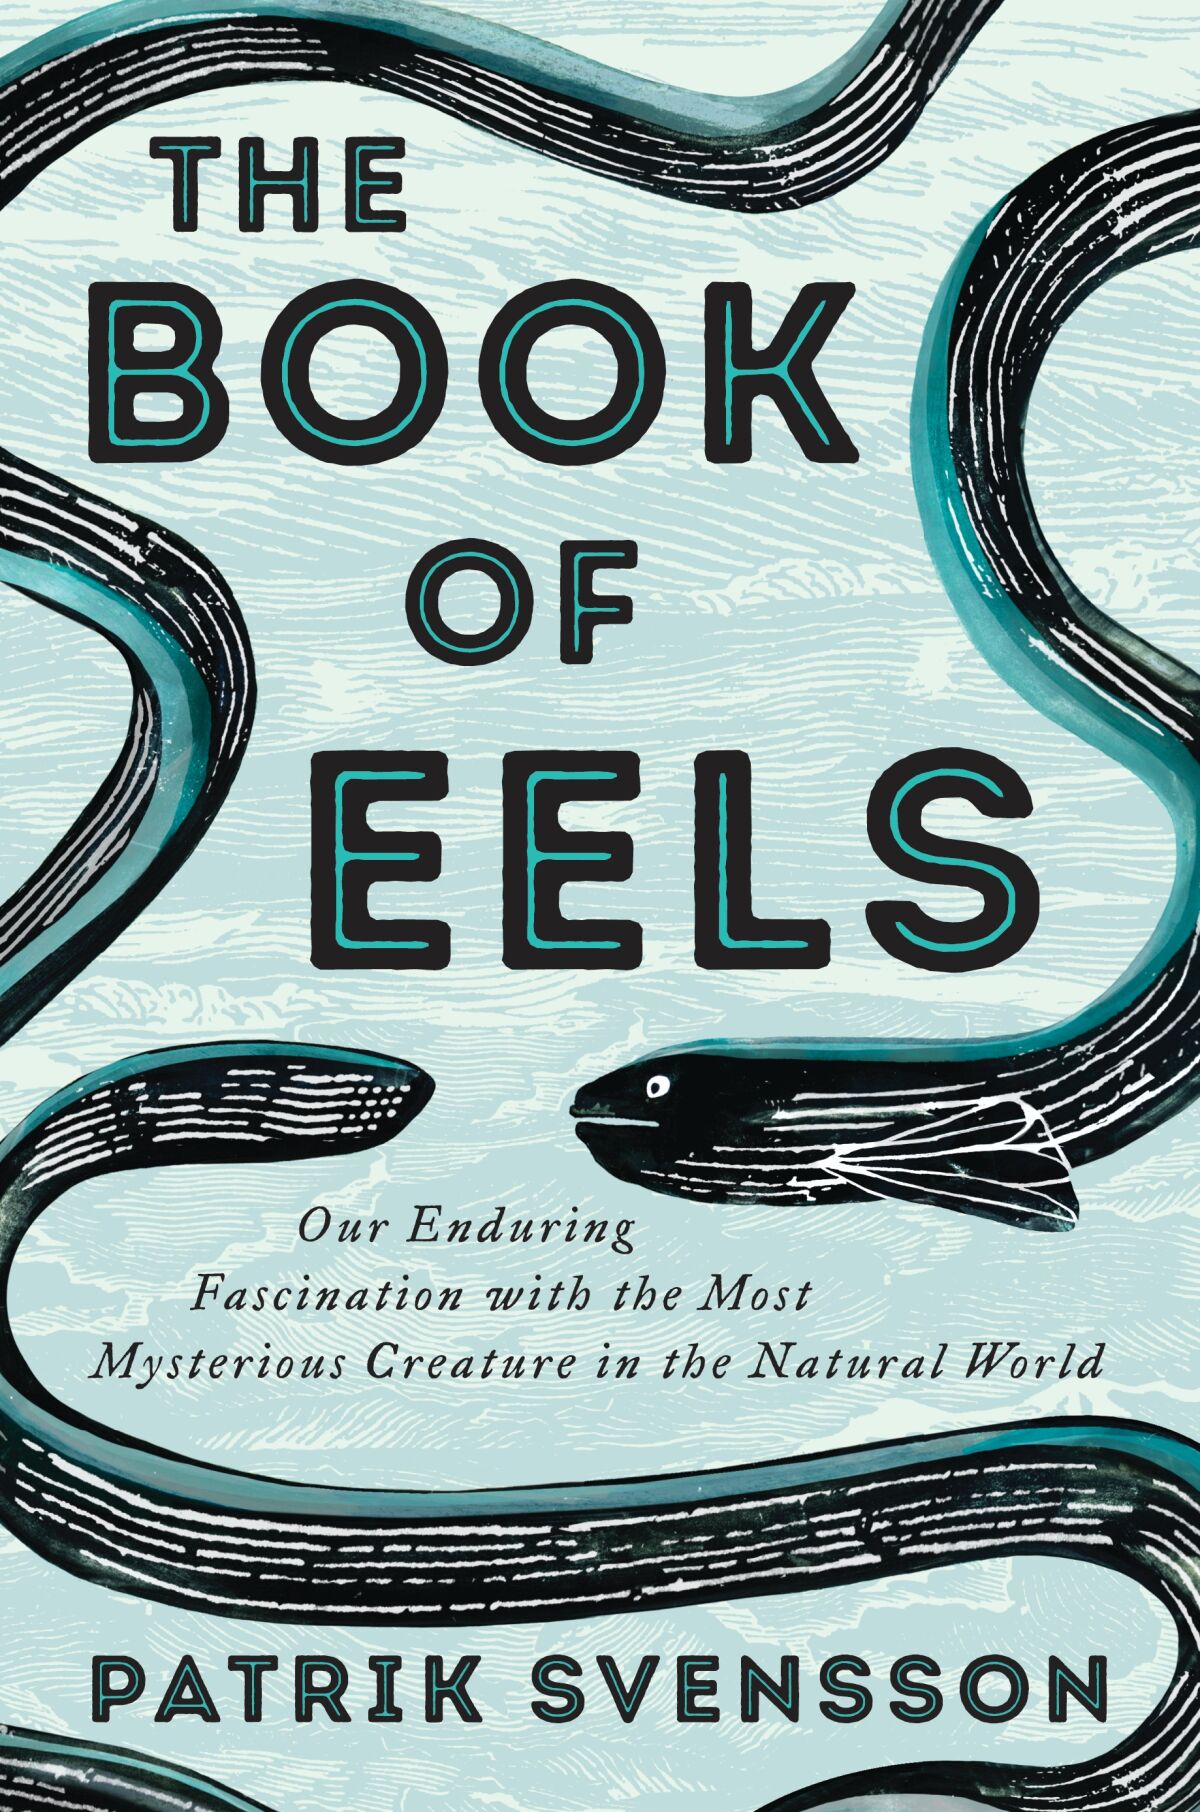 A book cover for "The Book of Eels."